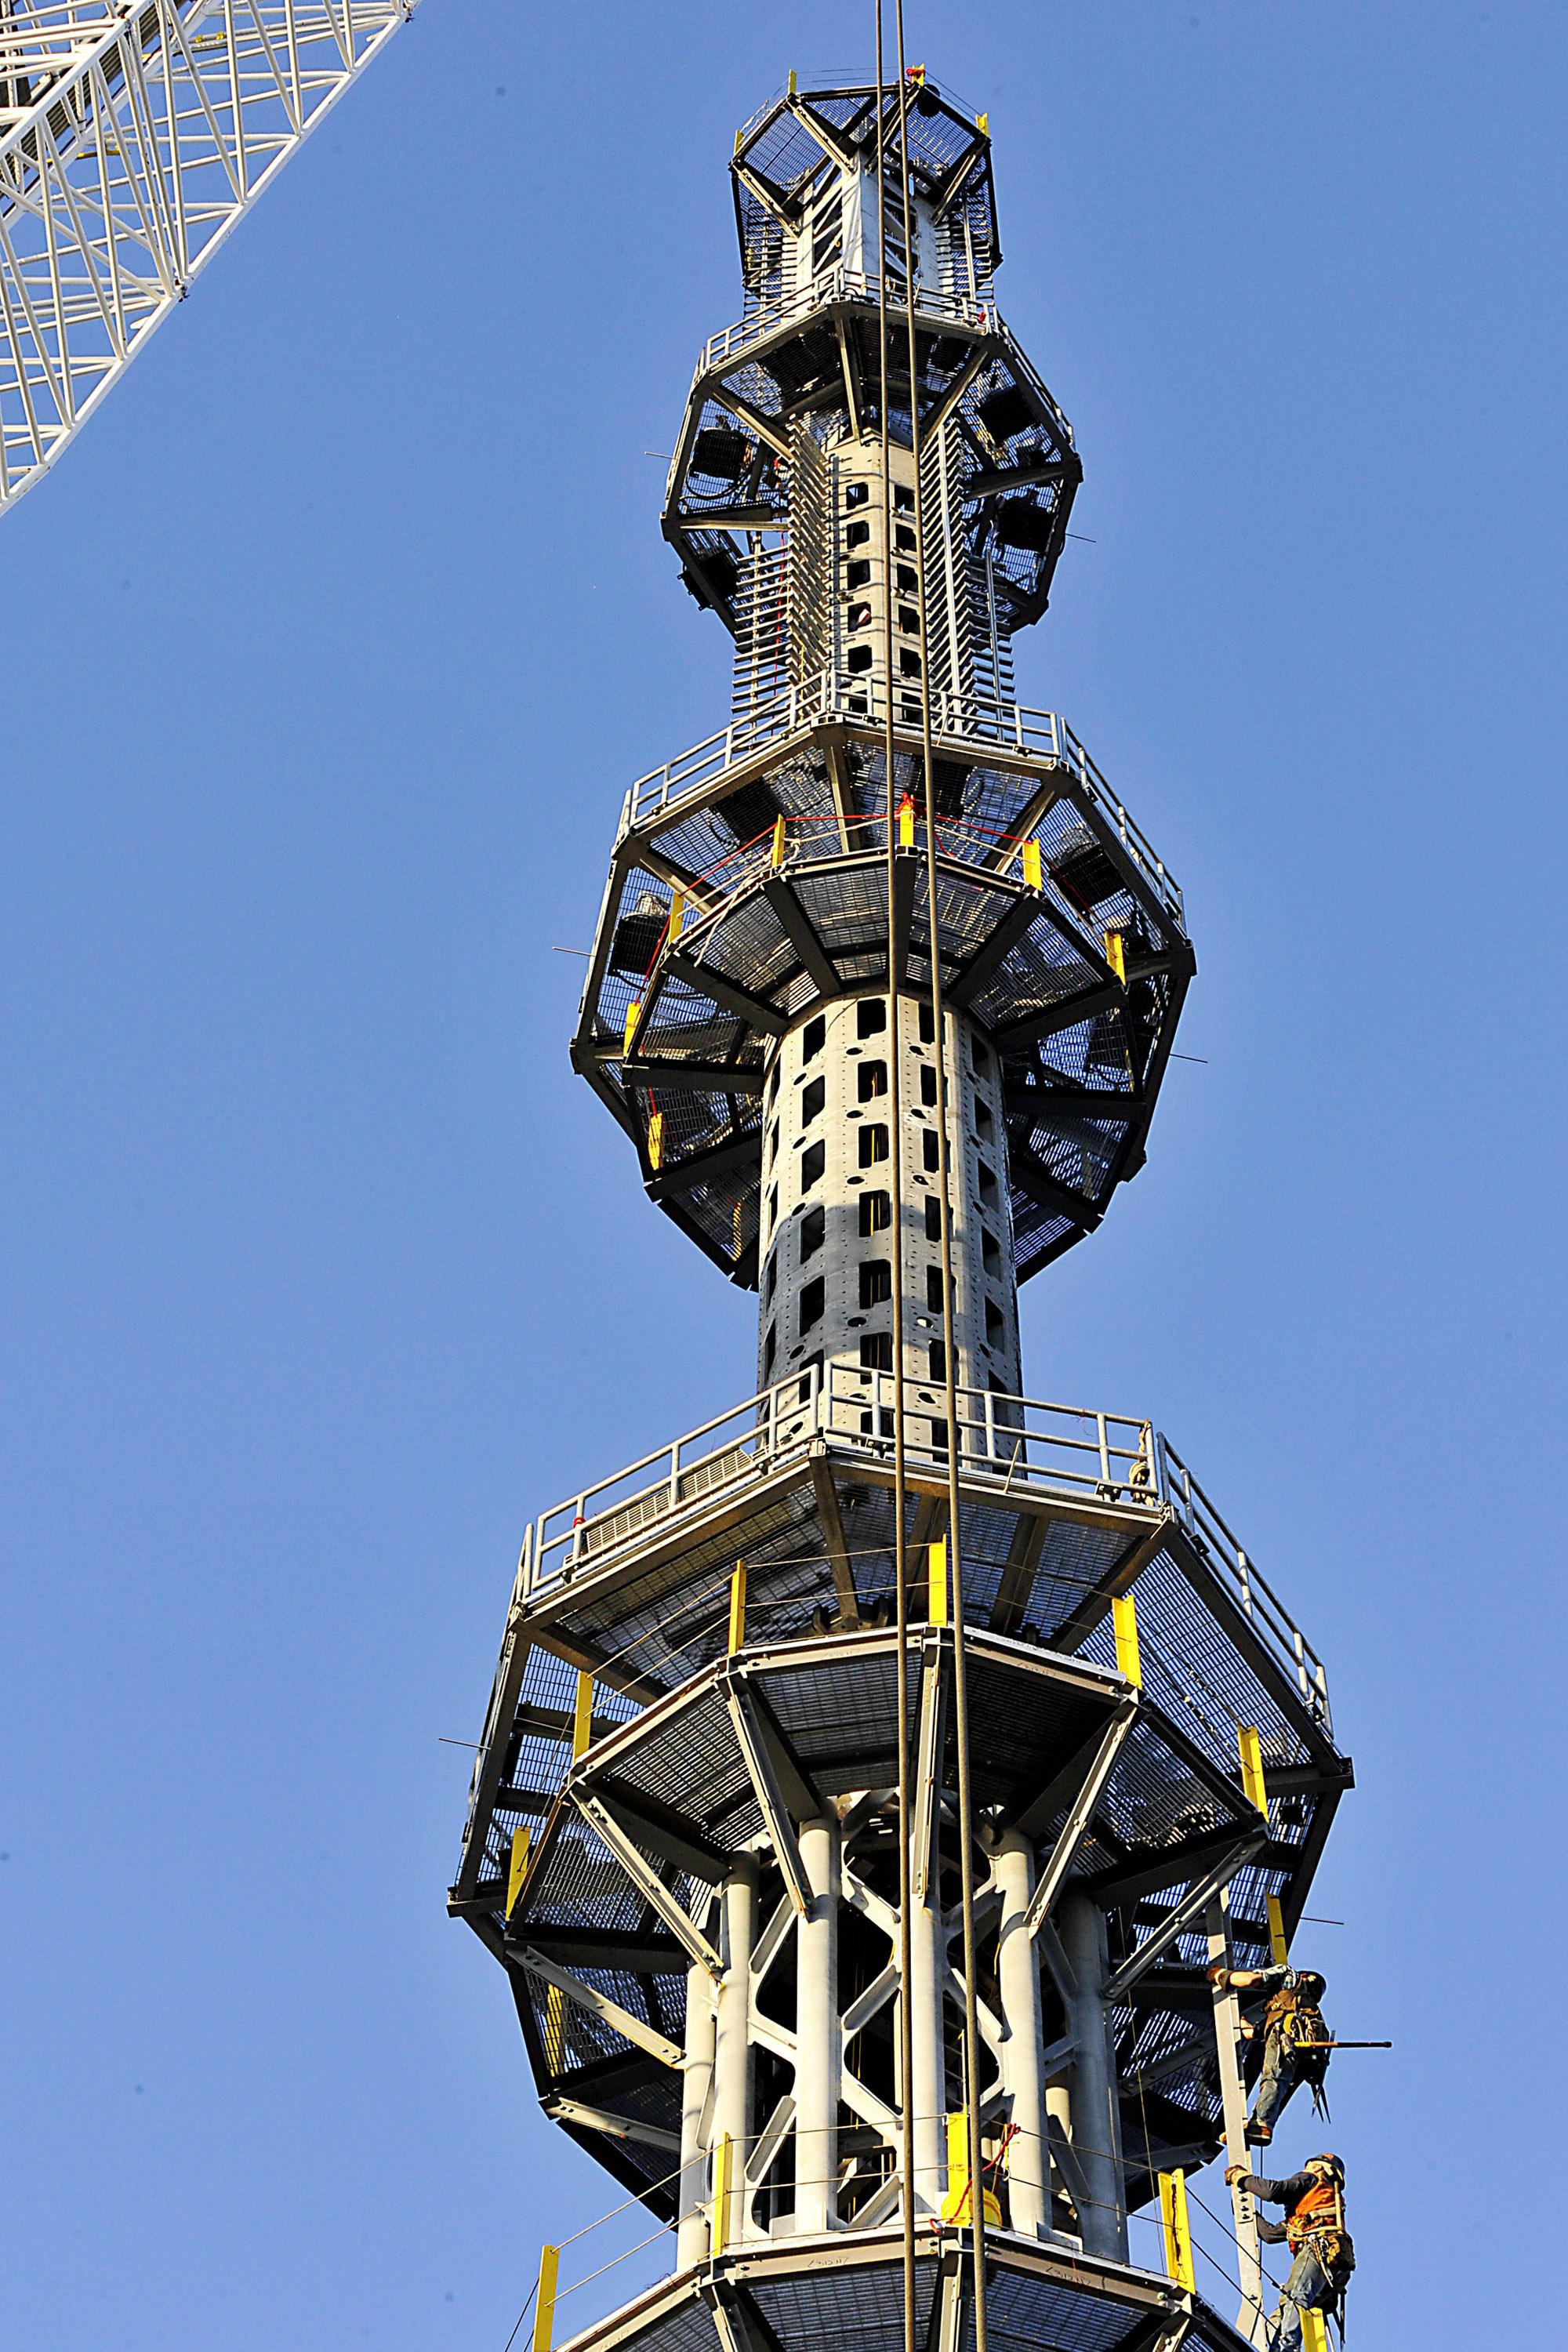 The final section of spire is installed atop One World Trade Center